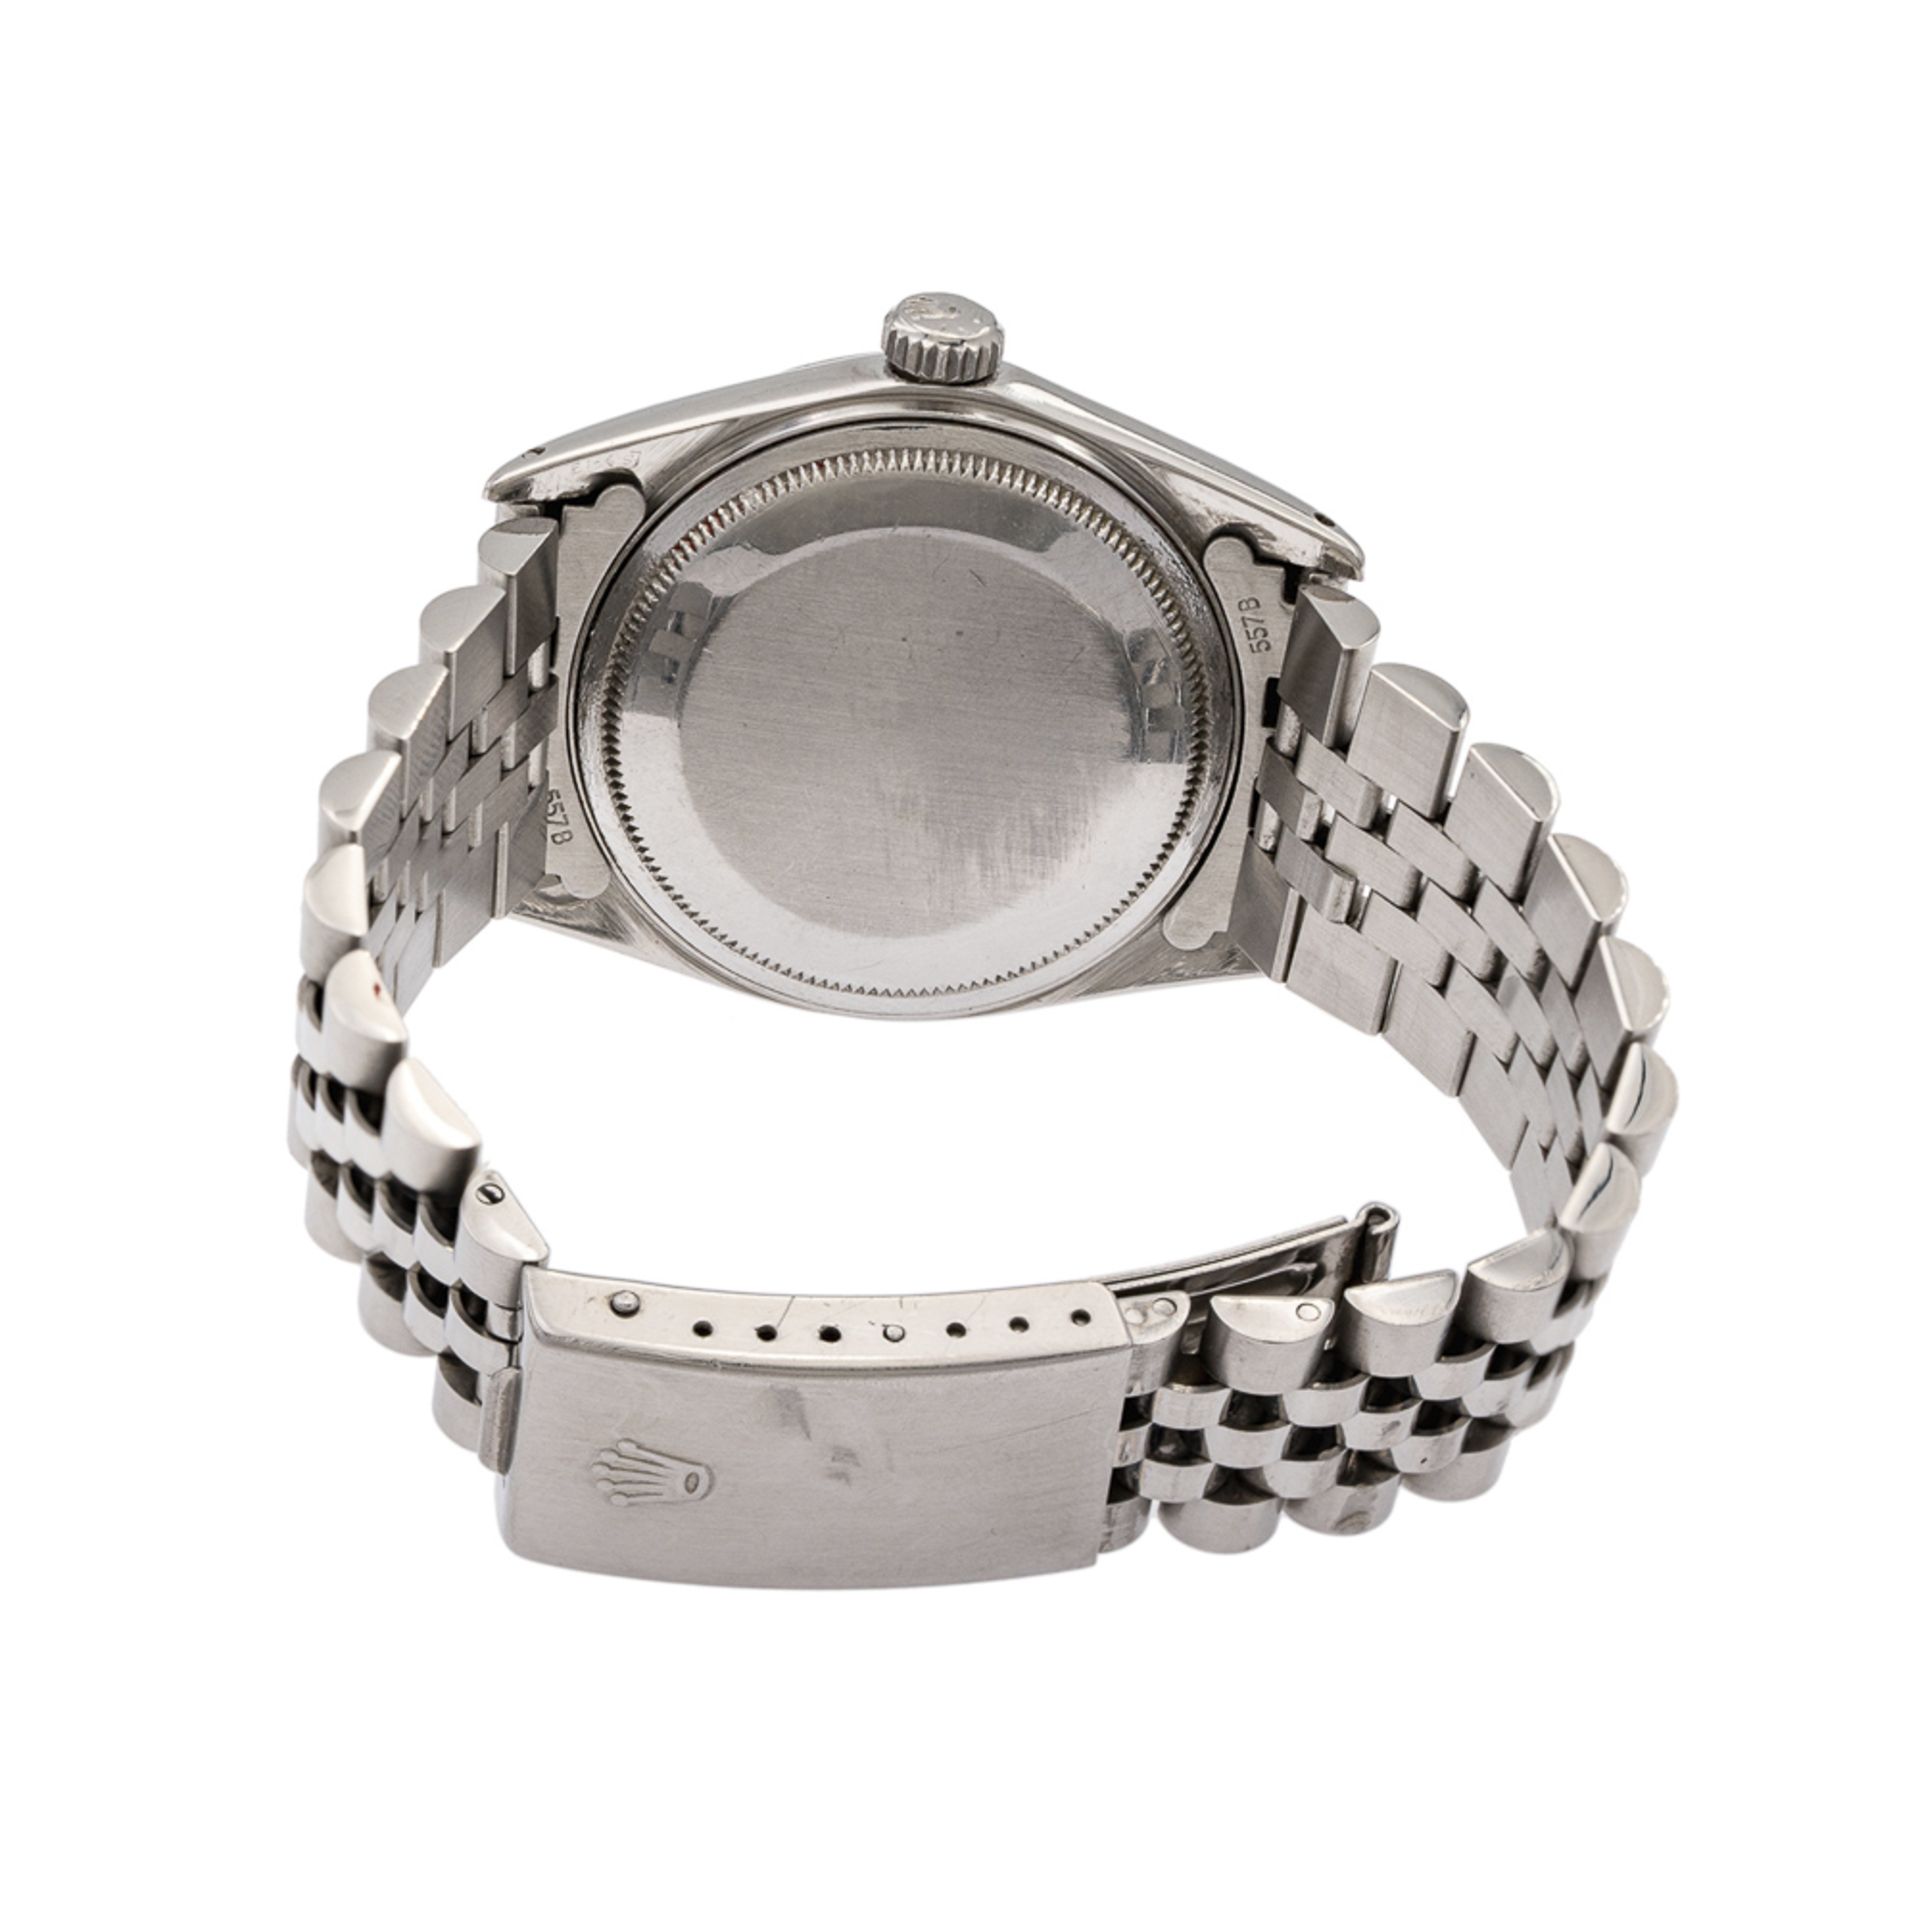 Rolex Oyster Perpetual Datejust wristwatch - Image 2 of 4